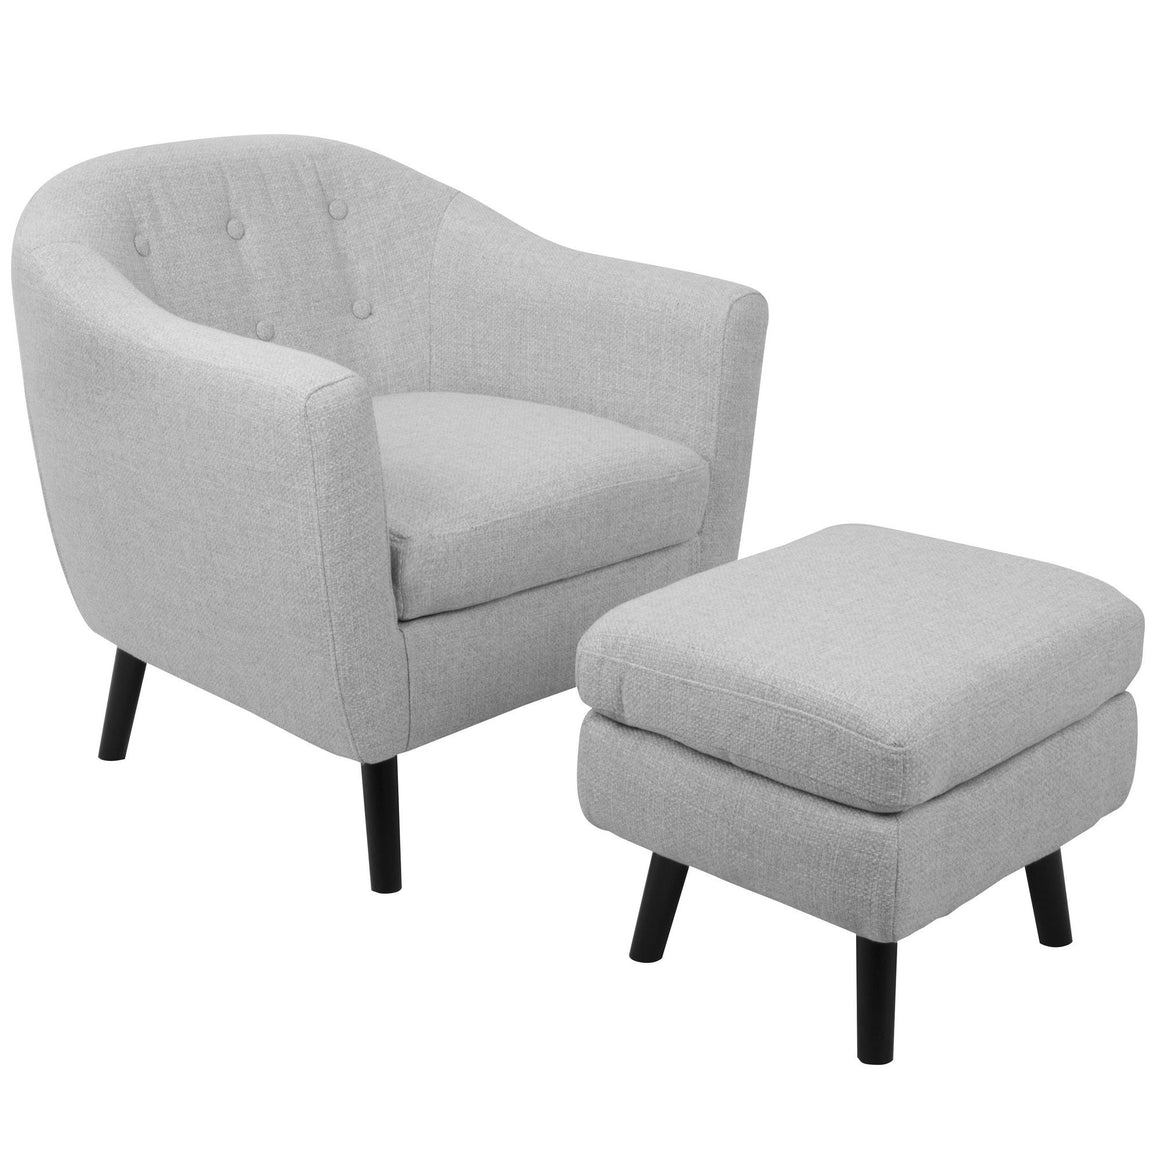 Rockwell Mid-Century Modern Accent Chair and Ottoman in Light Grey Noise Fabric by LumiSource